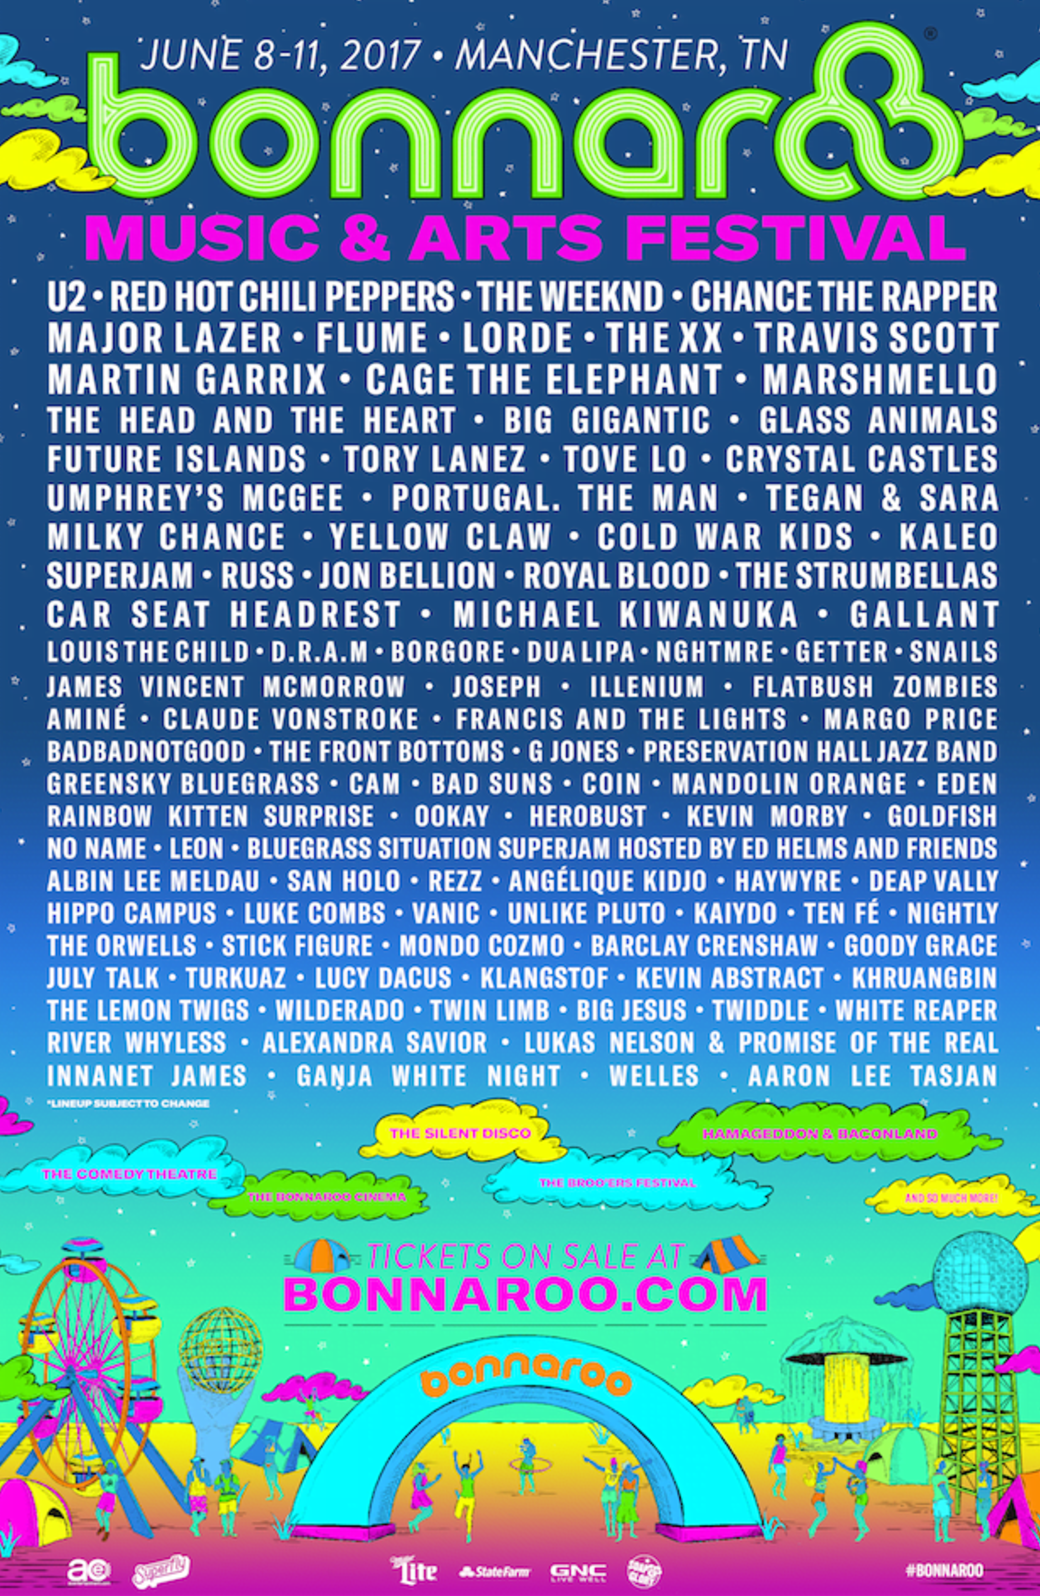 Bonnaroo Lineup Announced: U2, The Red Hot Chili Peppers, The Weeknd, Chance the Rapper, More to Play